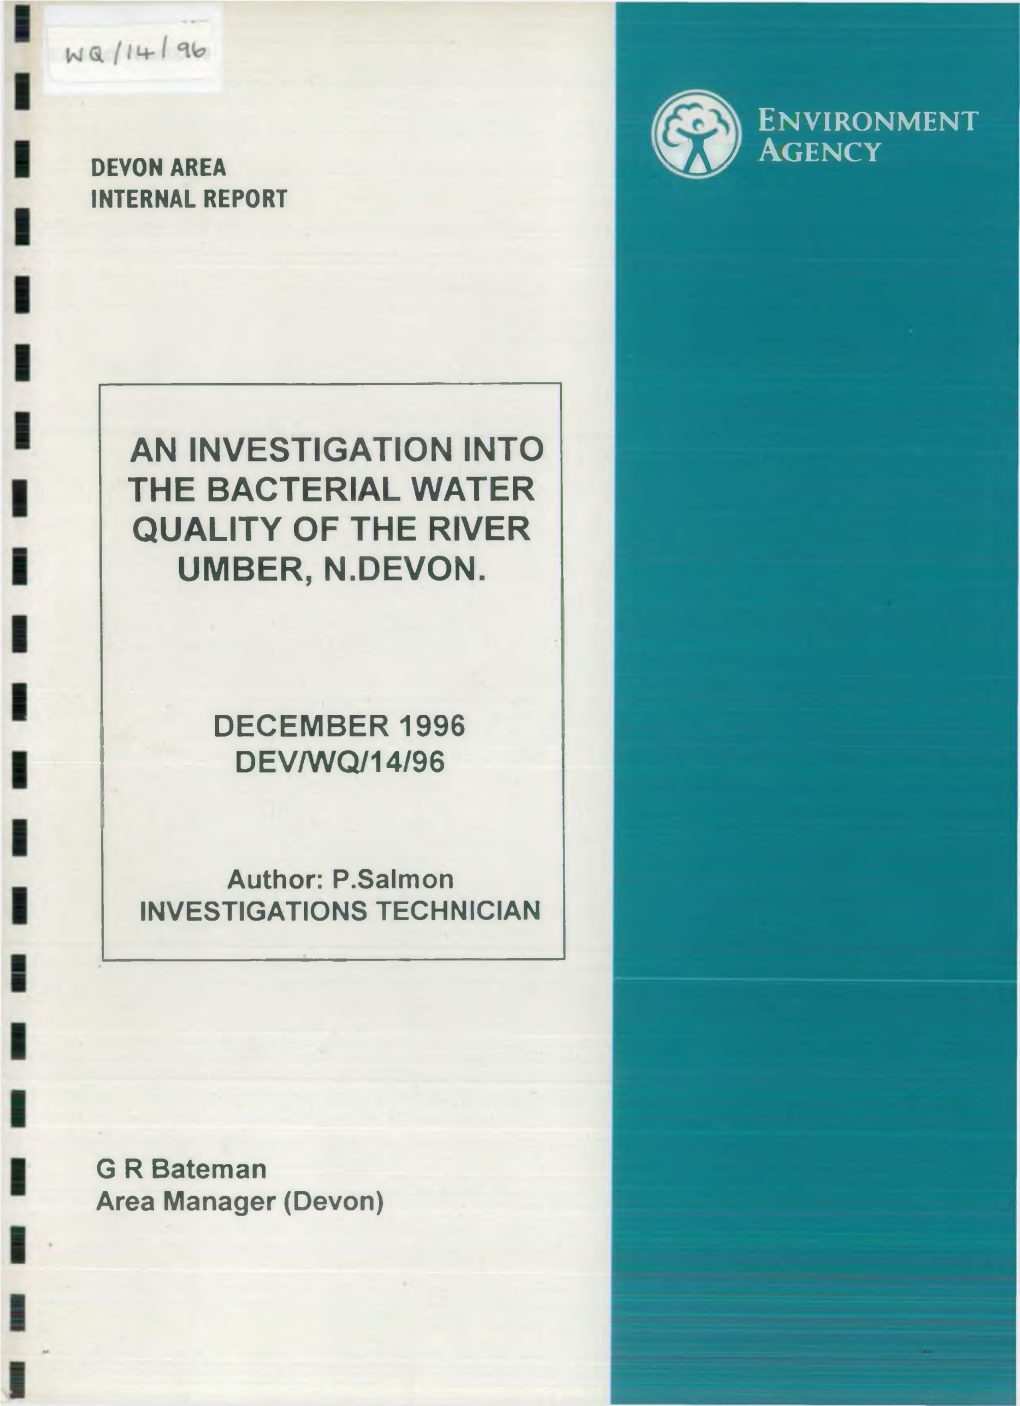 An Investigation Into the Bacterial Water Quality of the River Umber, N.Devon